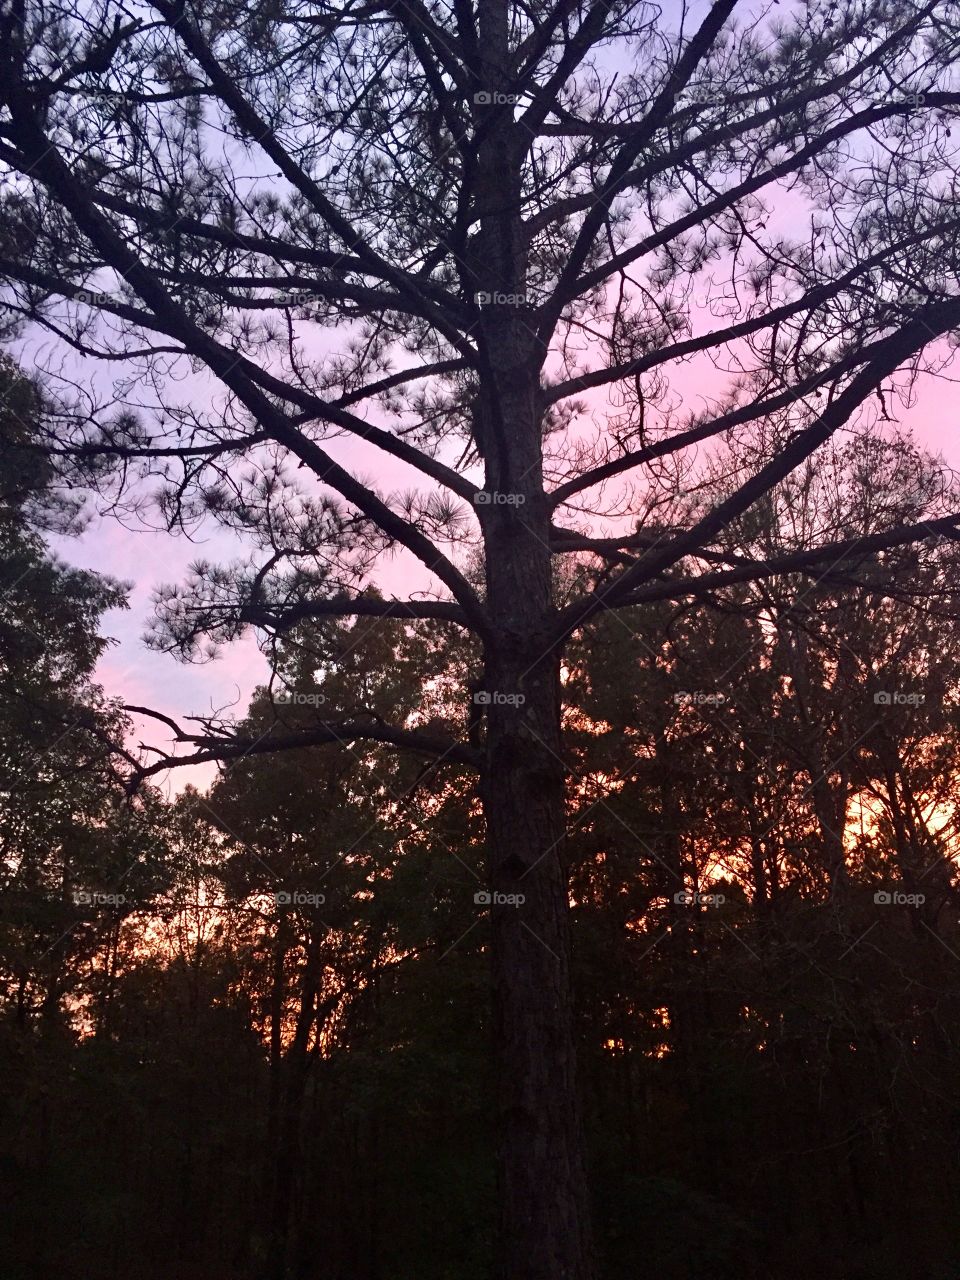 Dark pine trees trying to hide the magnificent sunset! The sky still peaks through with yellow, orange, pink and purple!